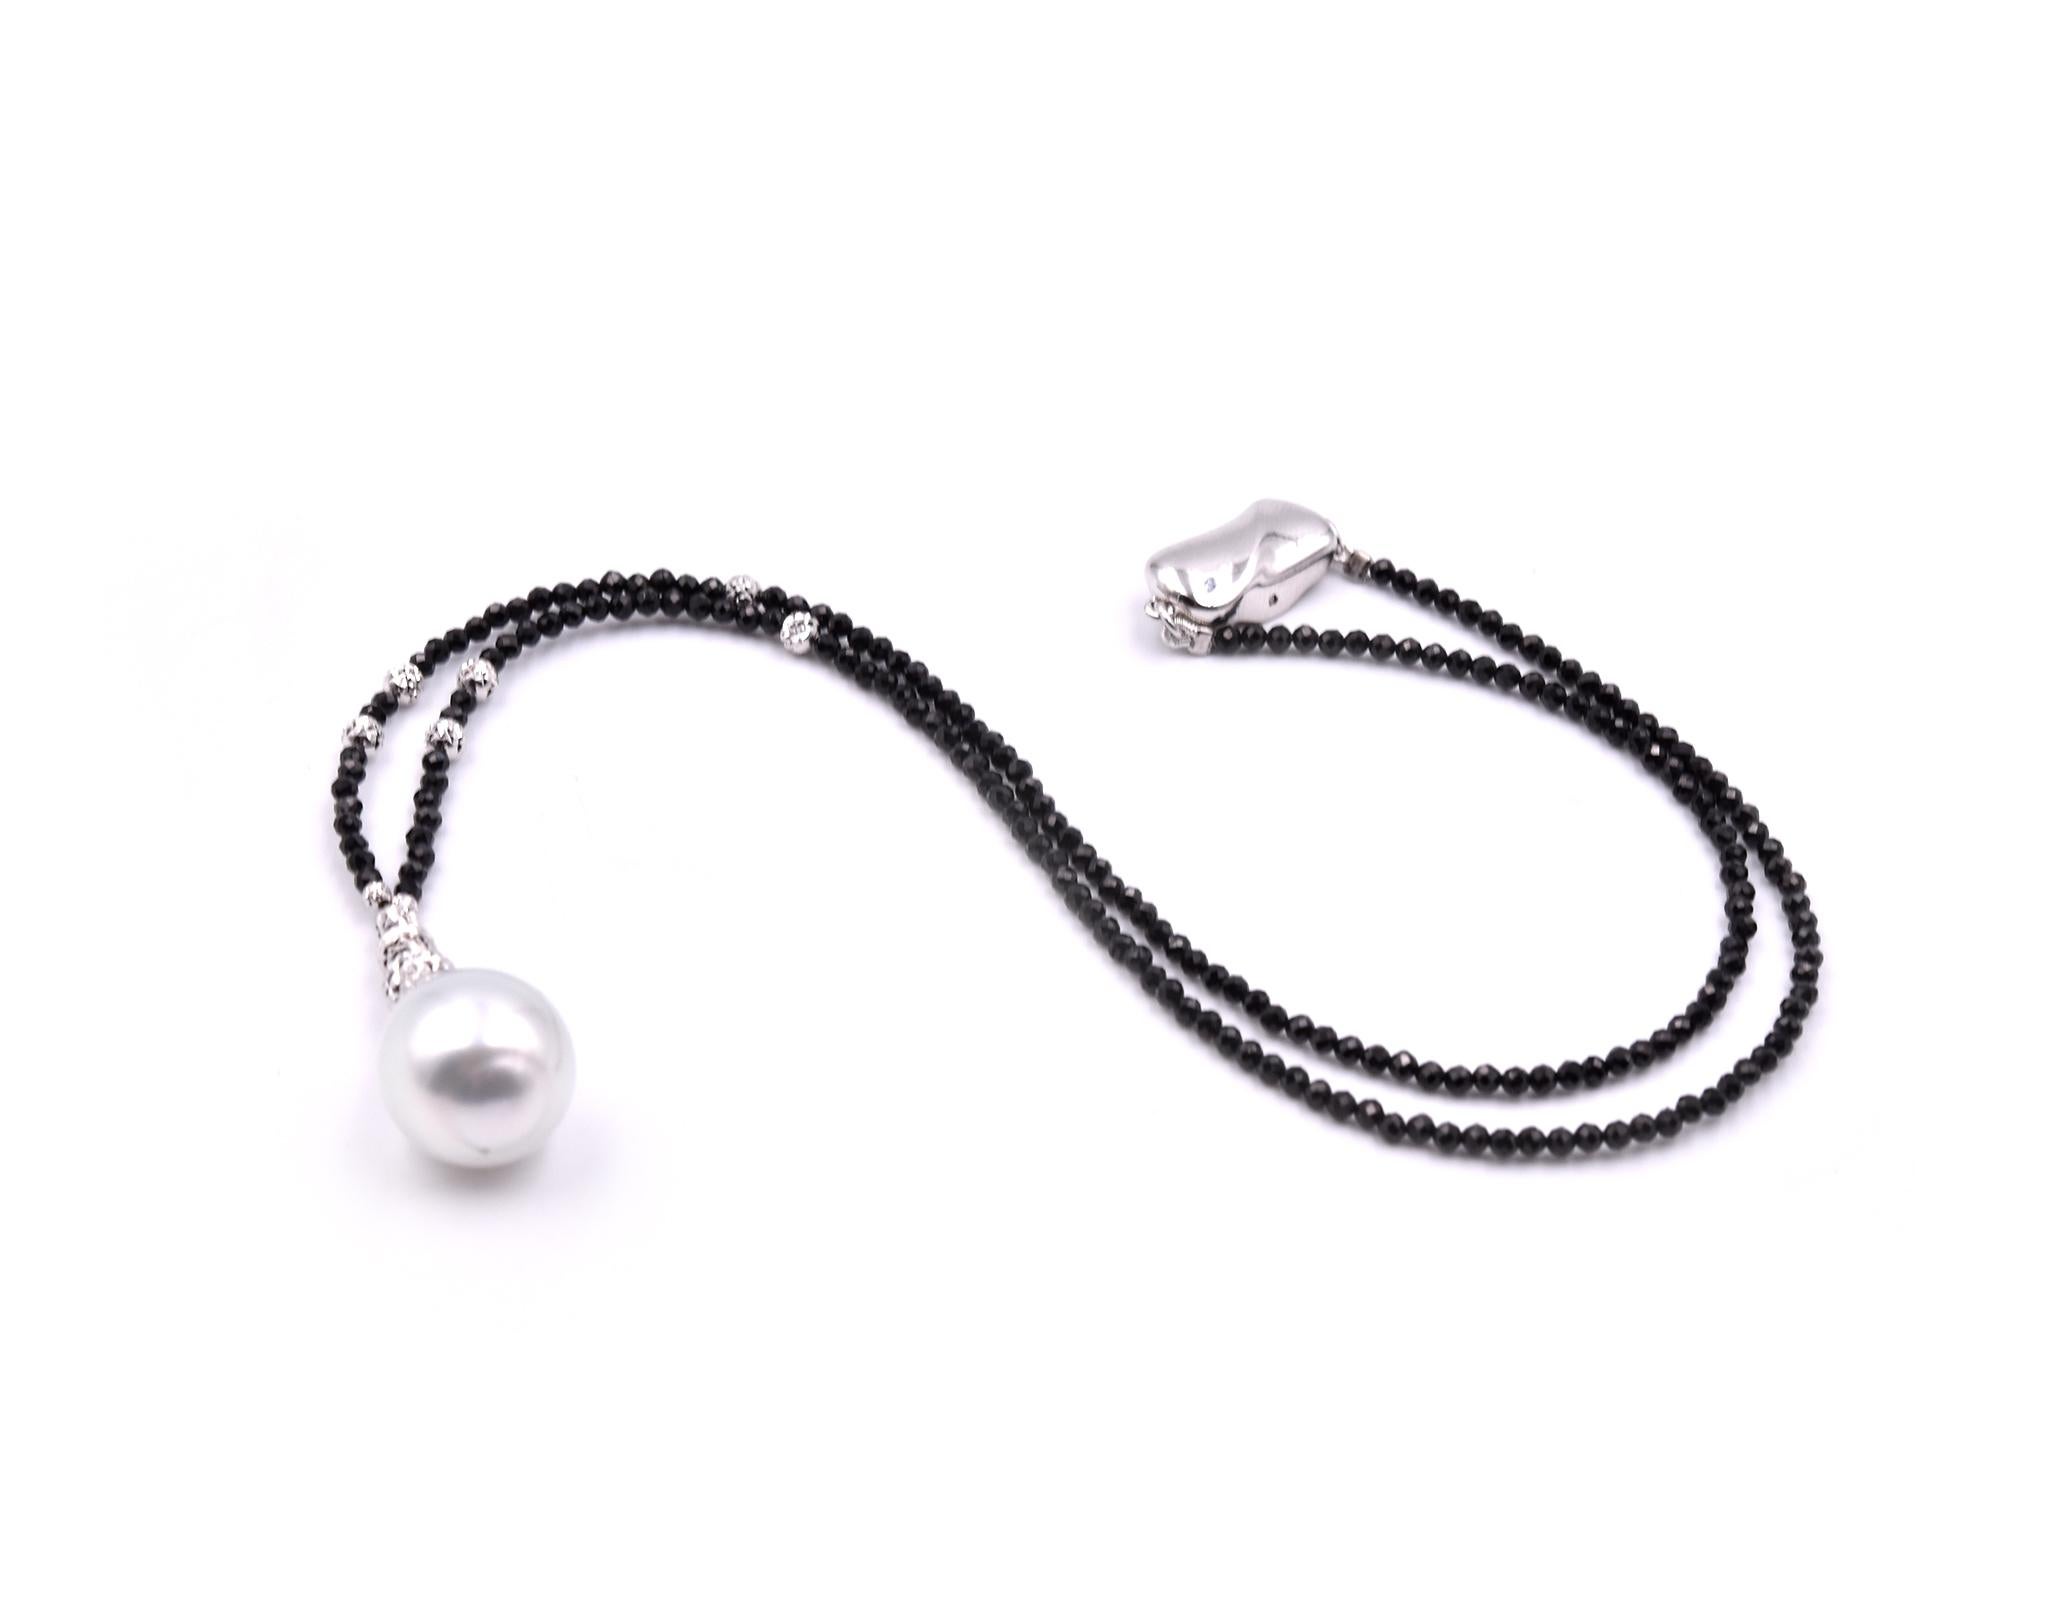 Women's Faceted Black Spinel Bead and White South Sea Pearl Drop Necklace